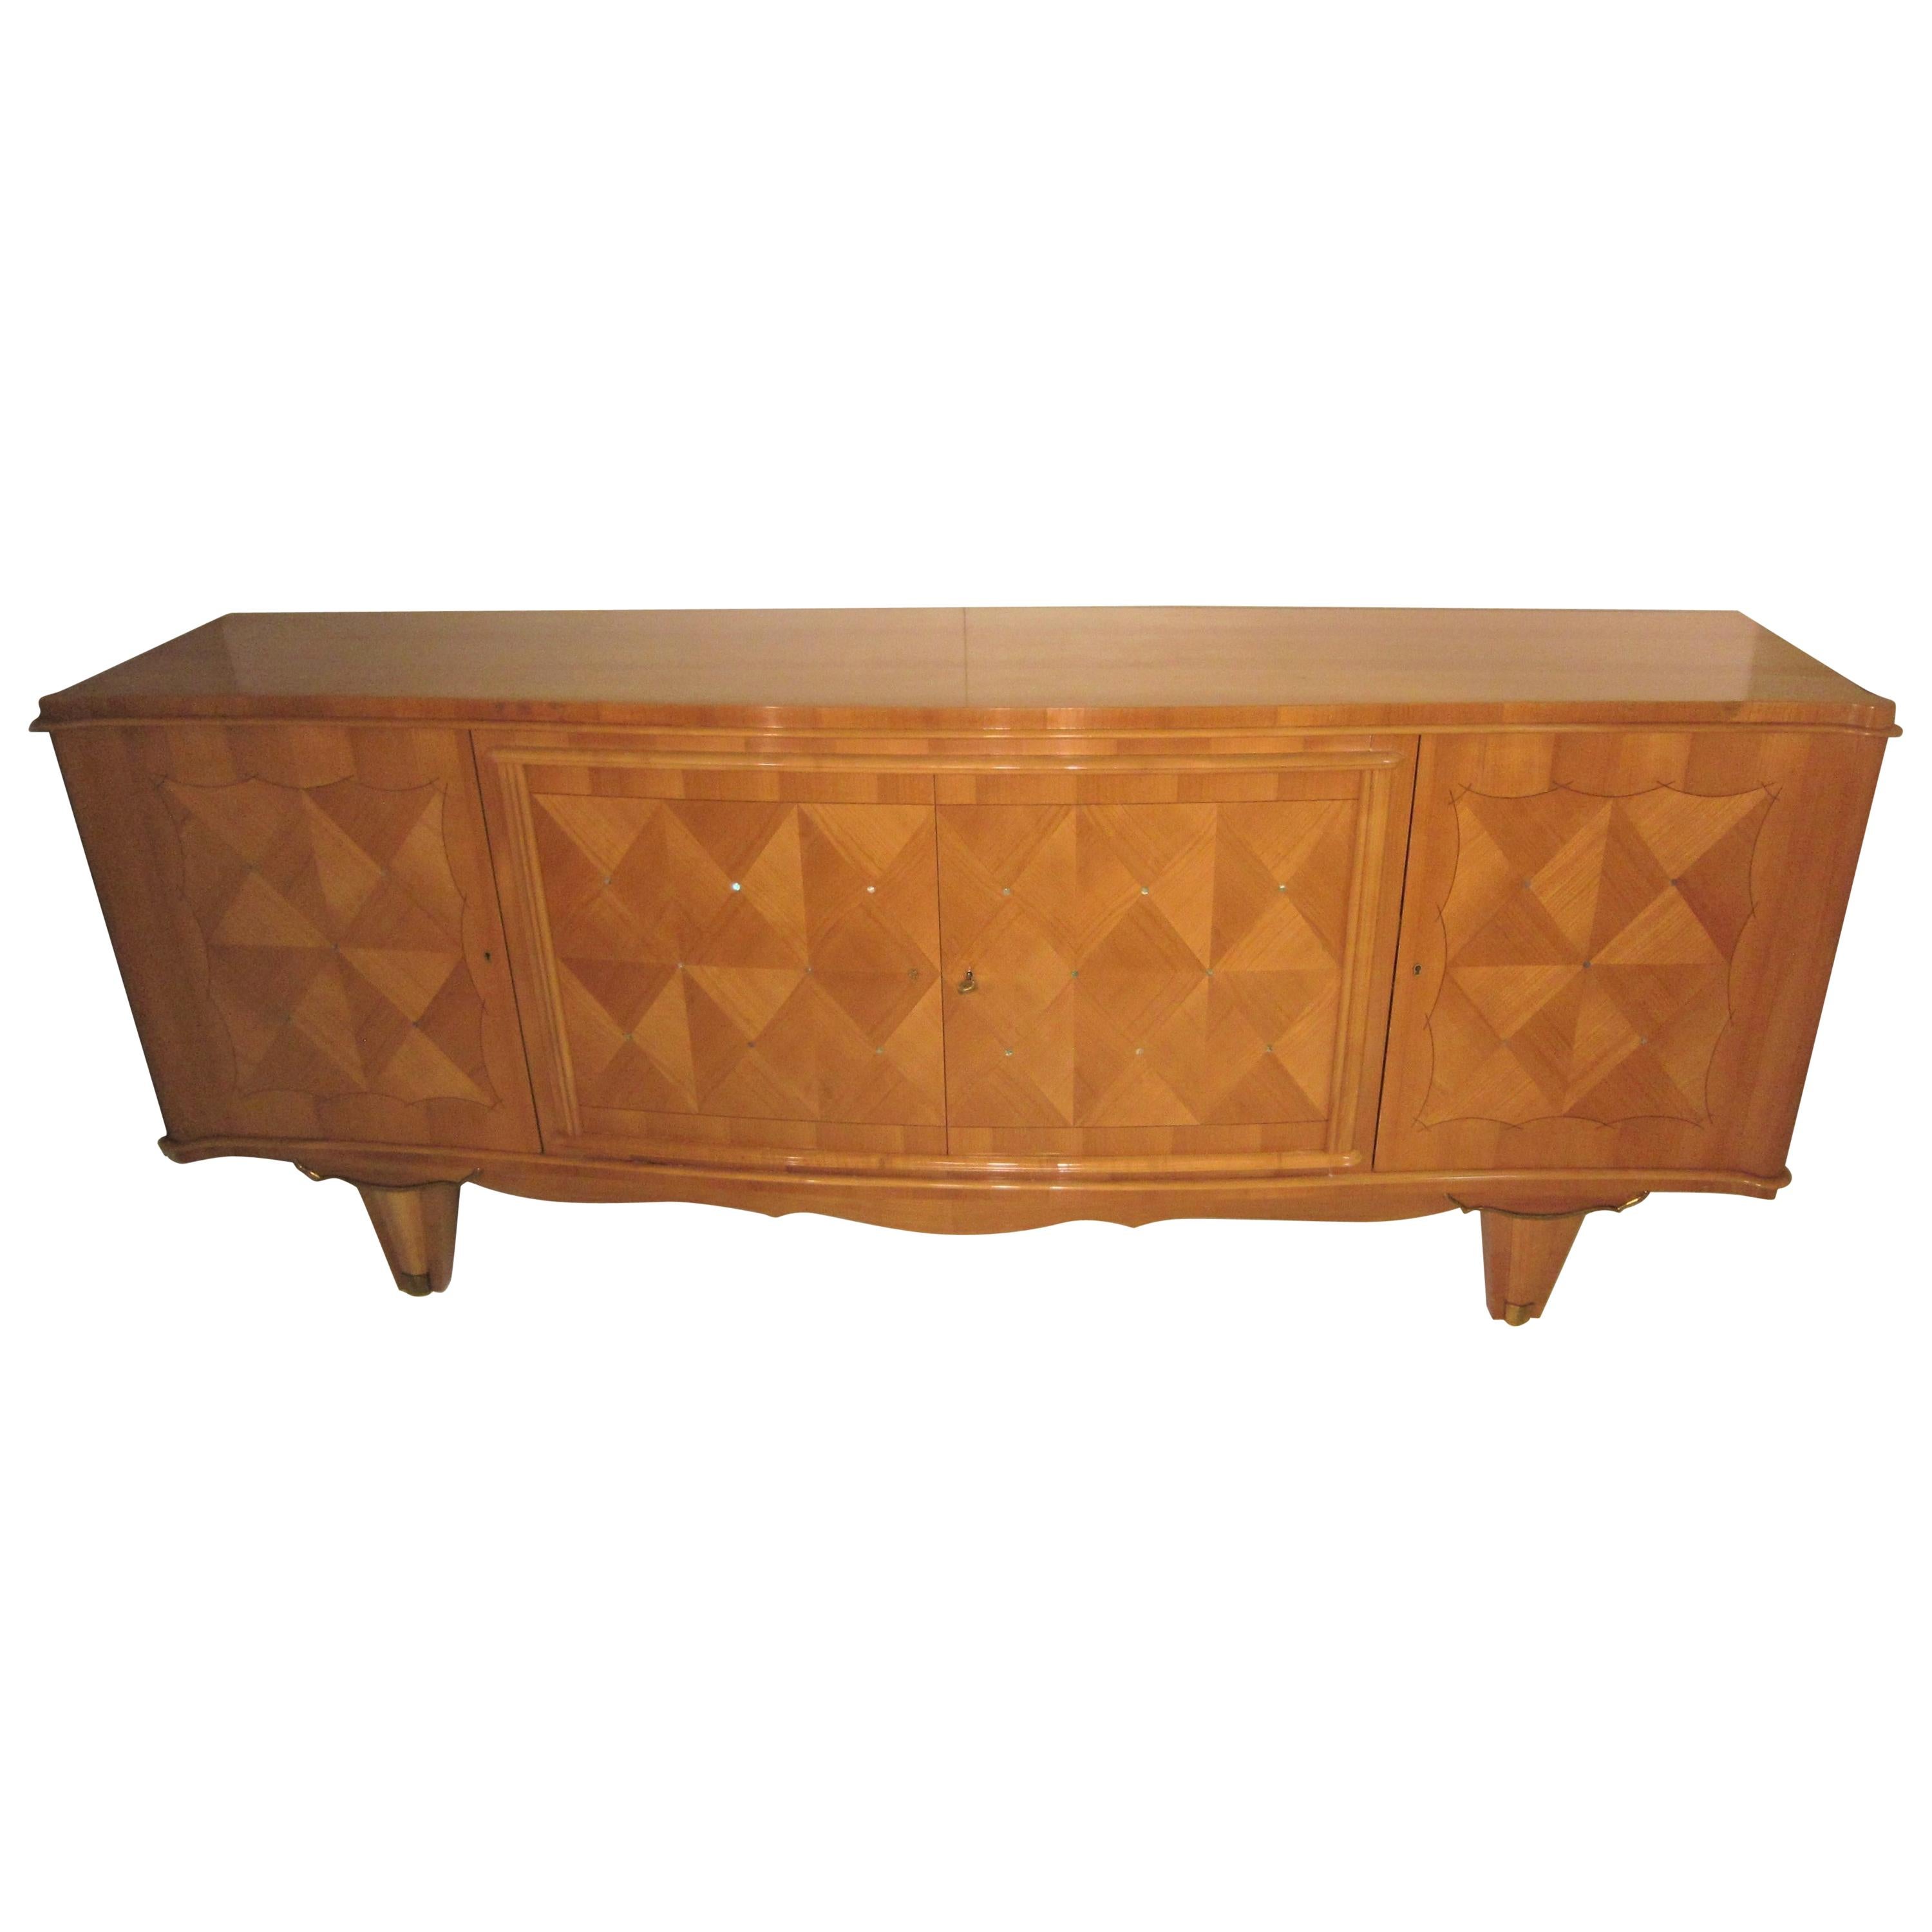 1940s Sycamore Credenza in Parquetry Inlay, Attributed to Andre Arbus